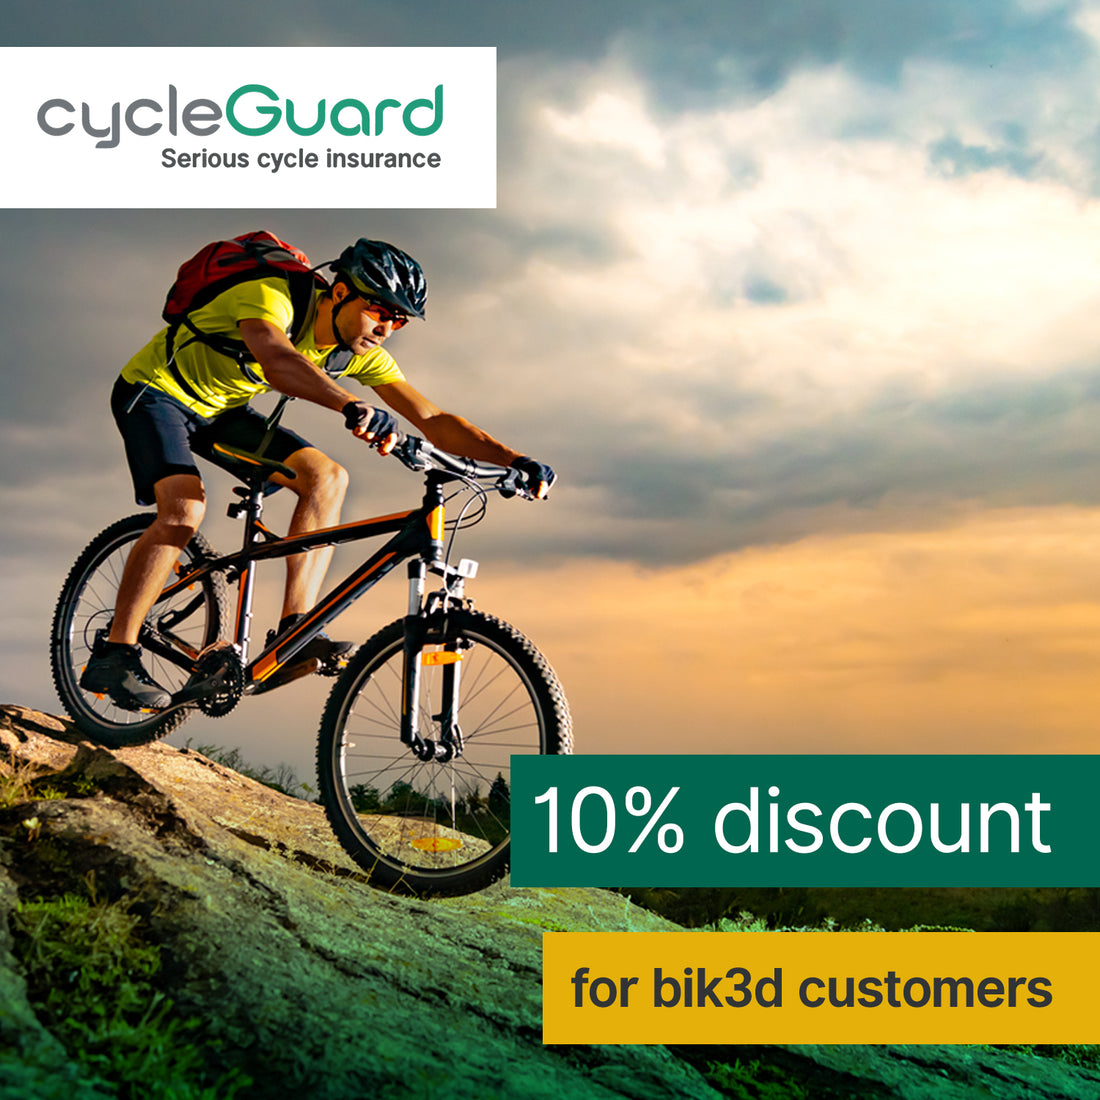 Bik3d in new and exciting partnership with cycleGuard insurance